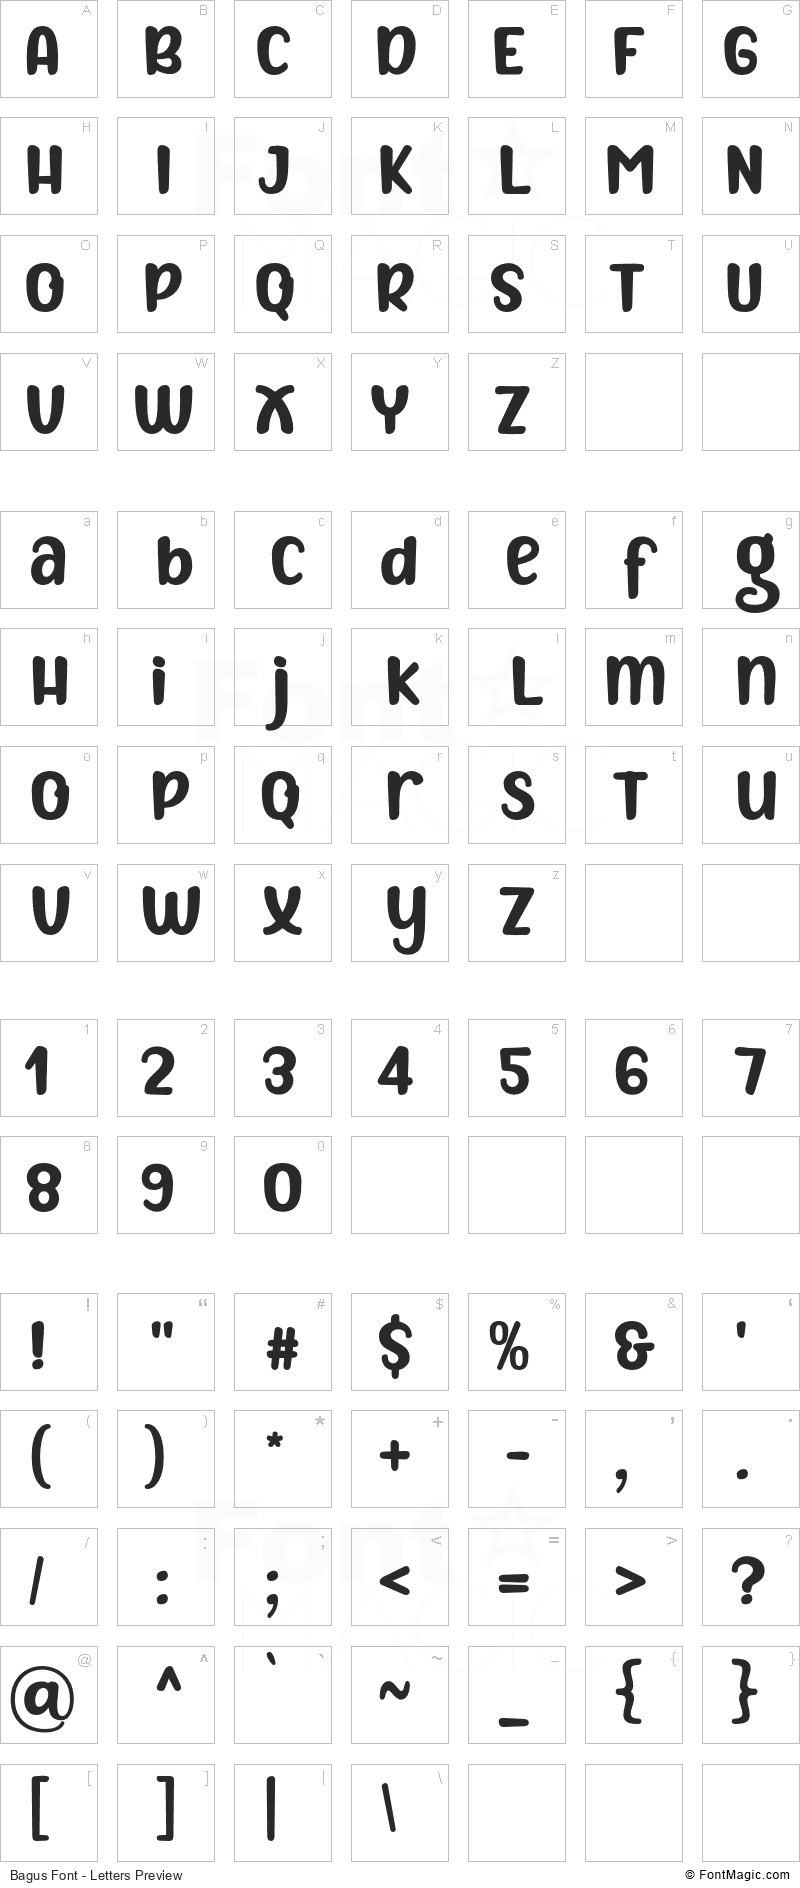 Bagus Font - All Latters Preview Chart